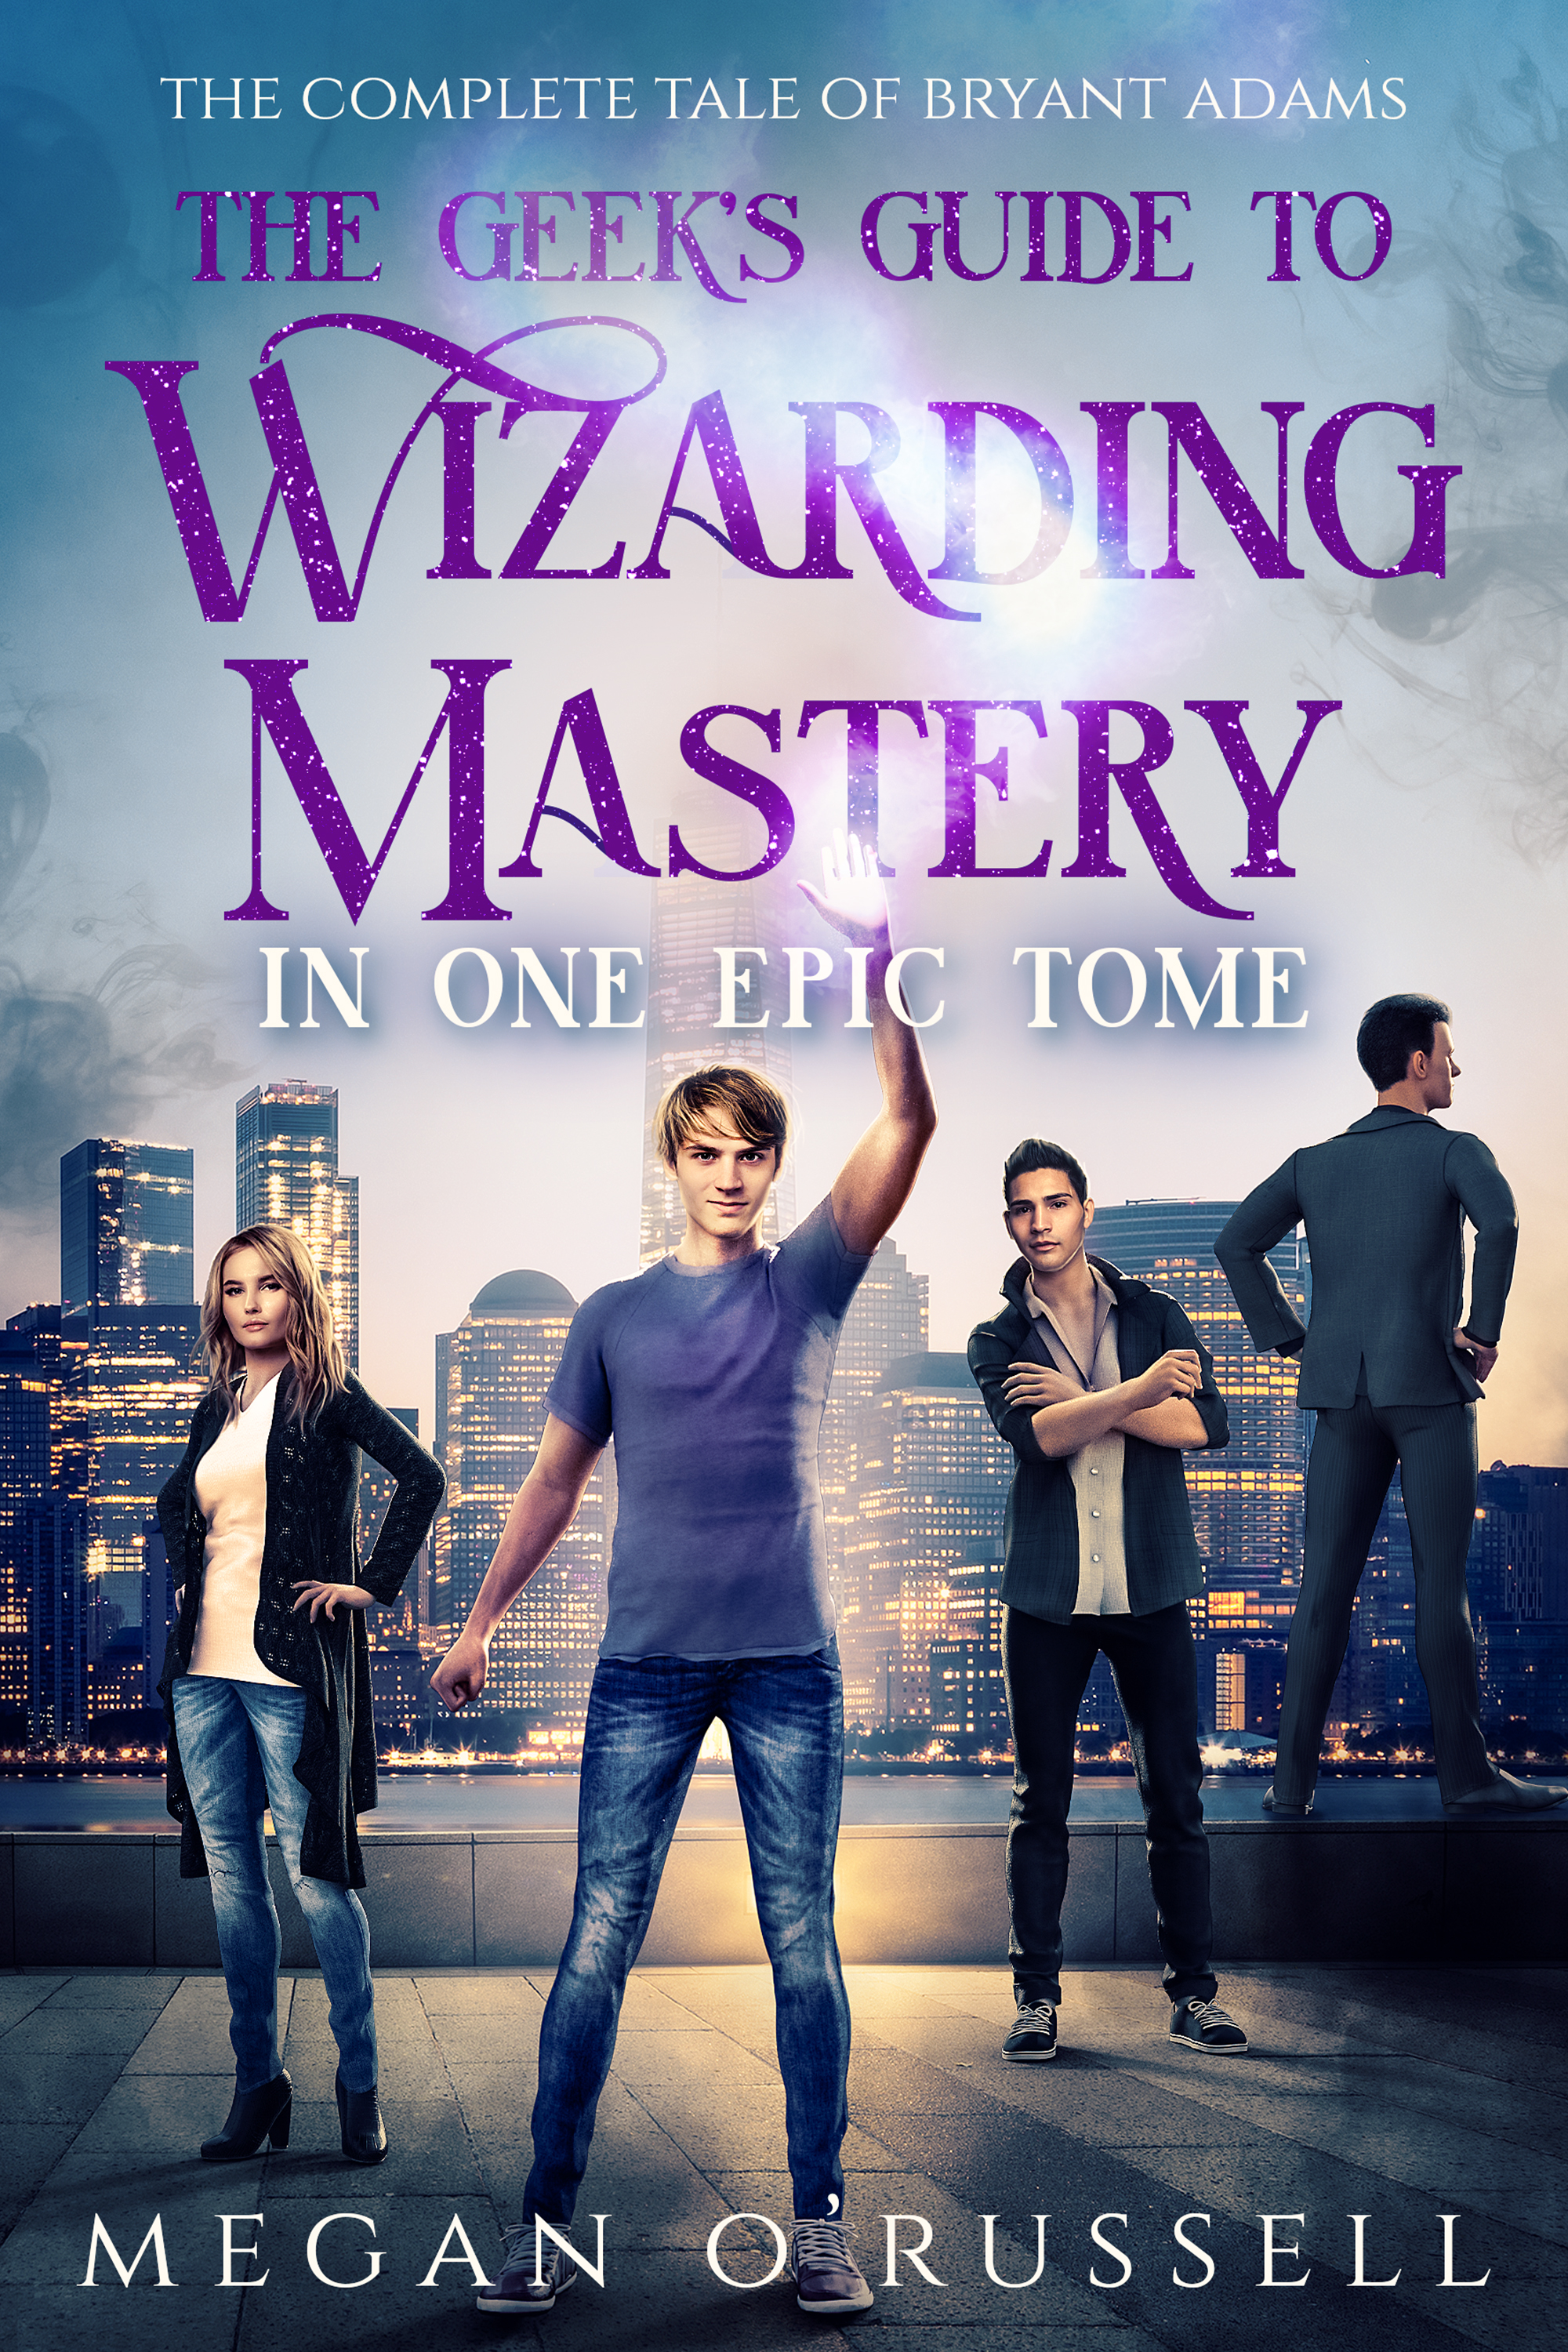 The Geek"s Guide to Wizarding Mastery in One Epic Tome